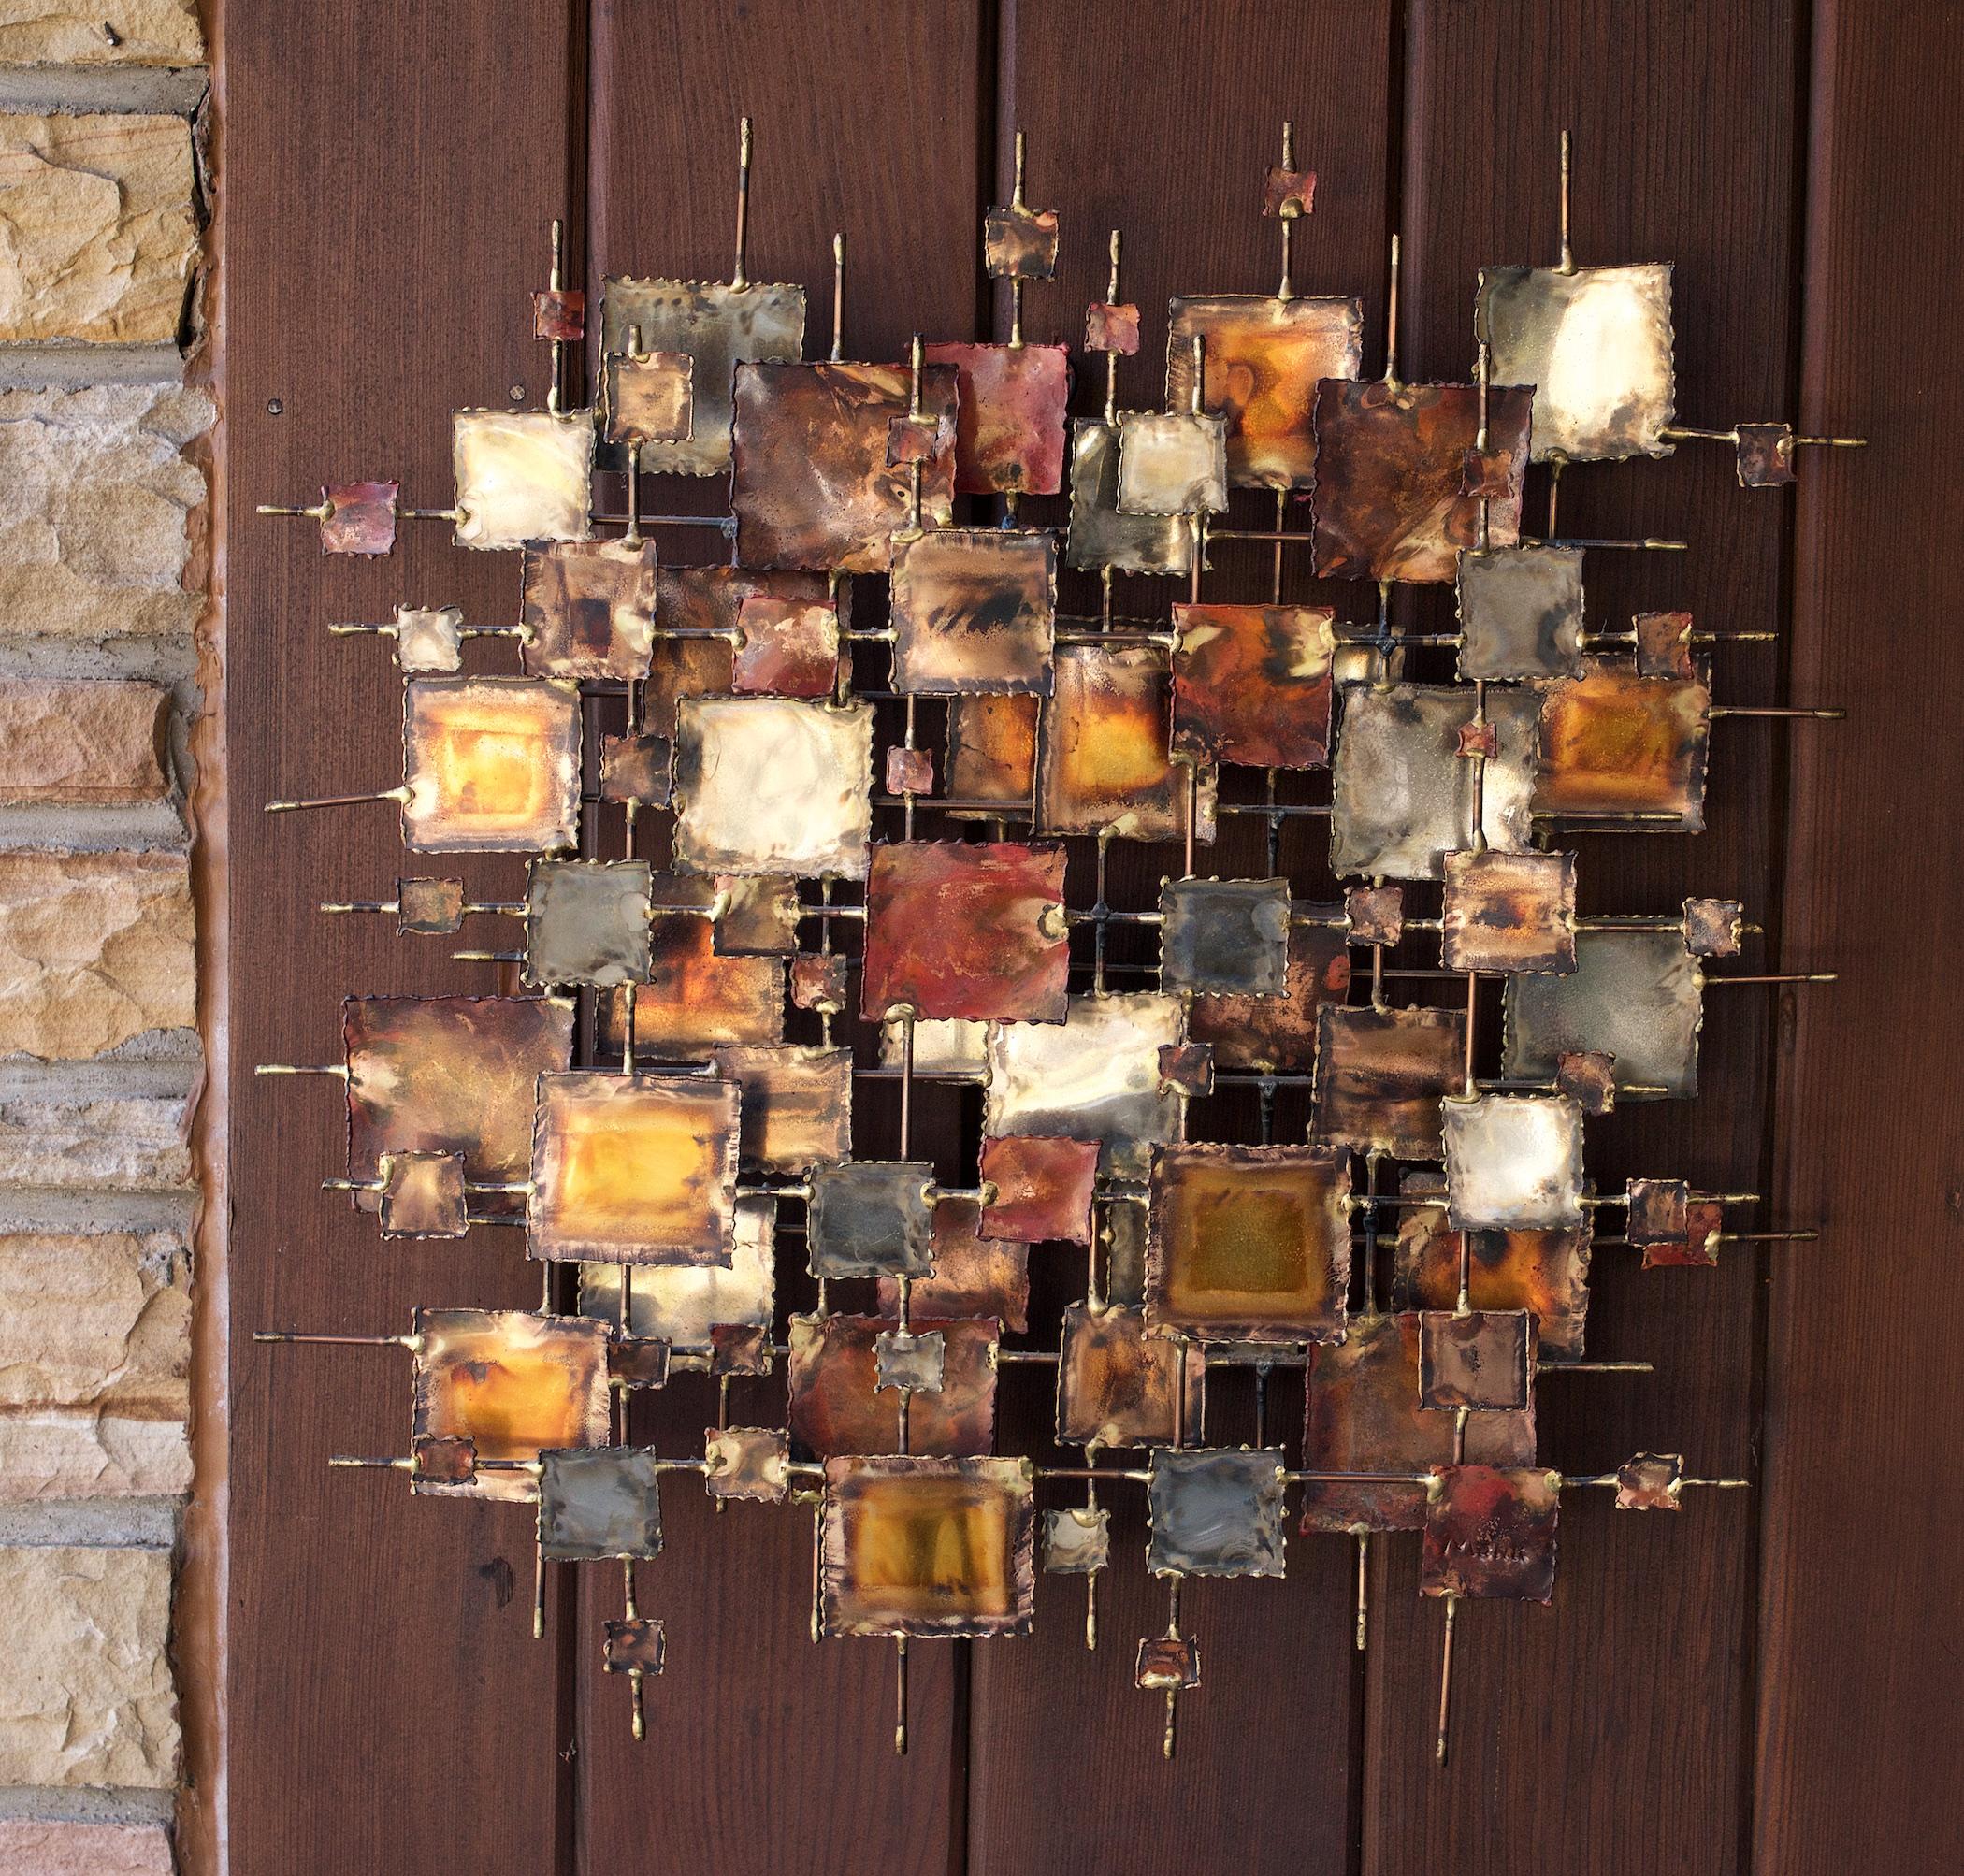 Brazened Metal Wall Art by Monk, in the style of Curtiss Jere of Artisan House. Medium in size at 21 inches square, great for Hallways, Foyers, etc.